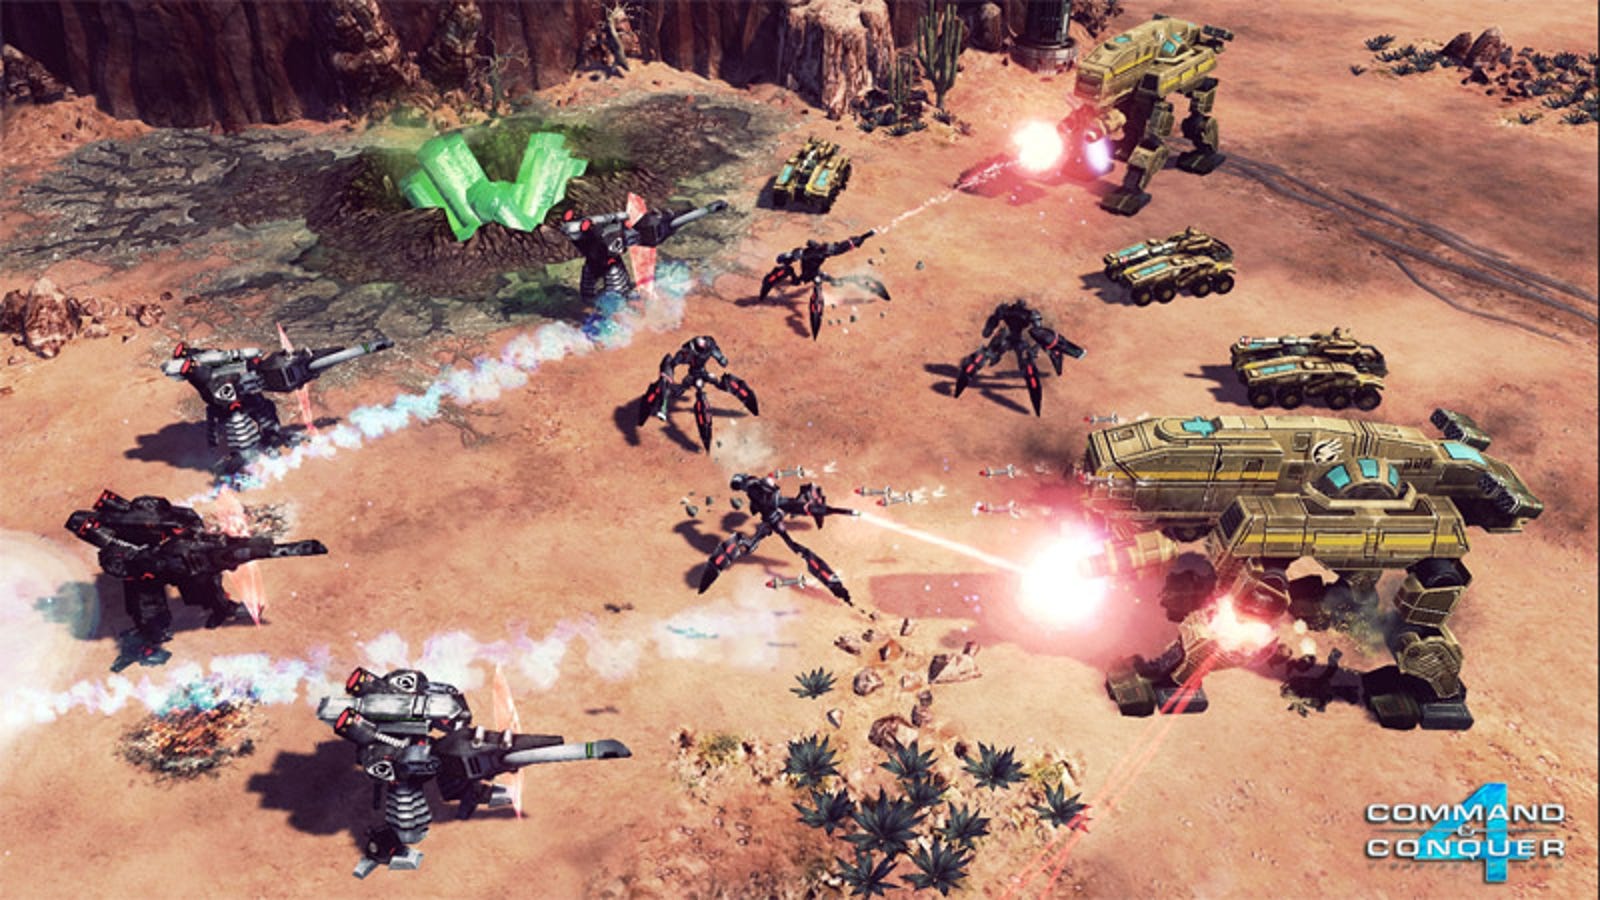 command-conquer-4-gets-release-date-preorder-bonuses